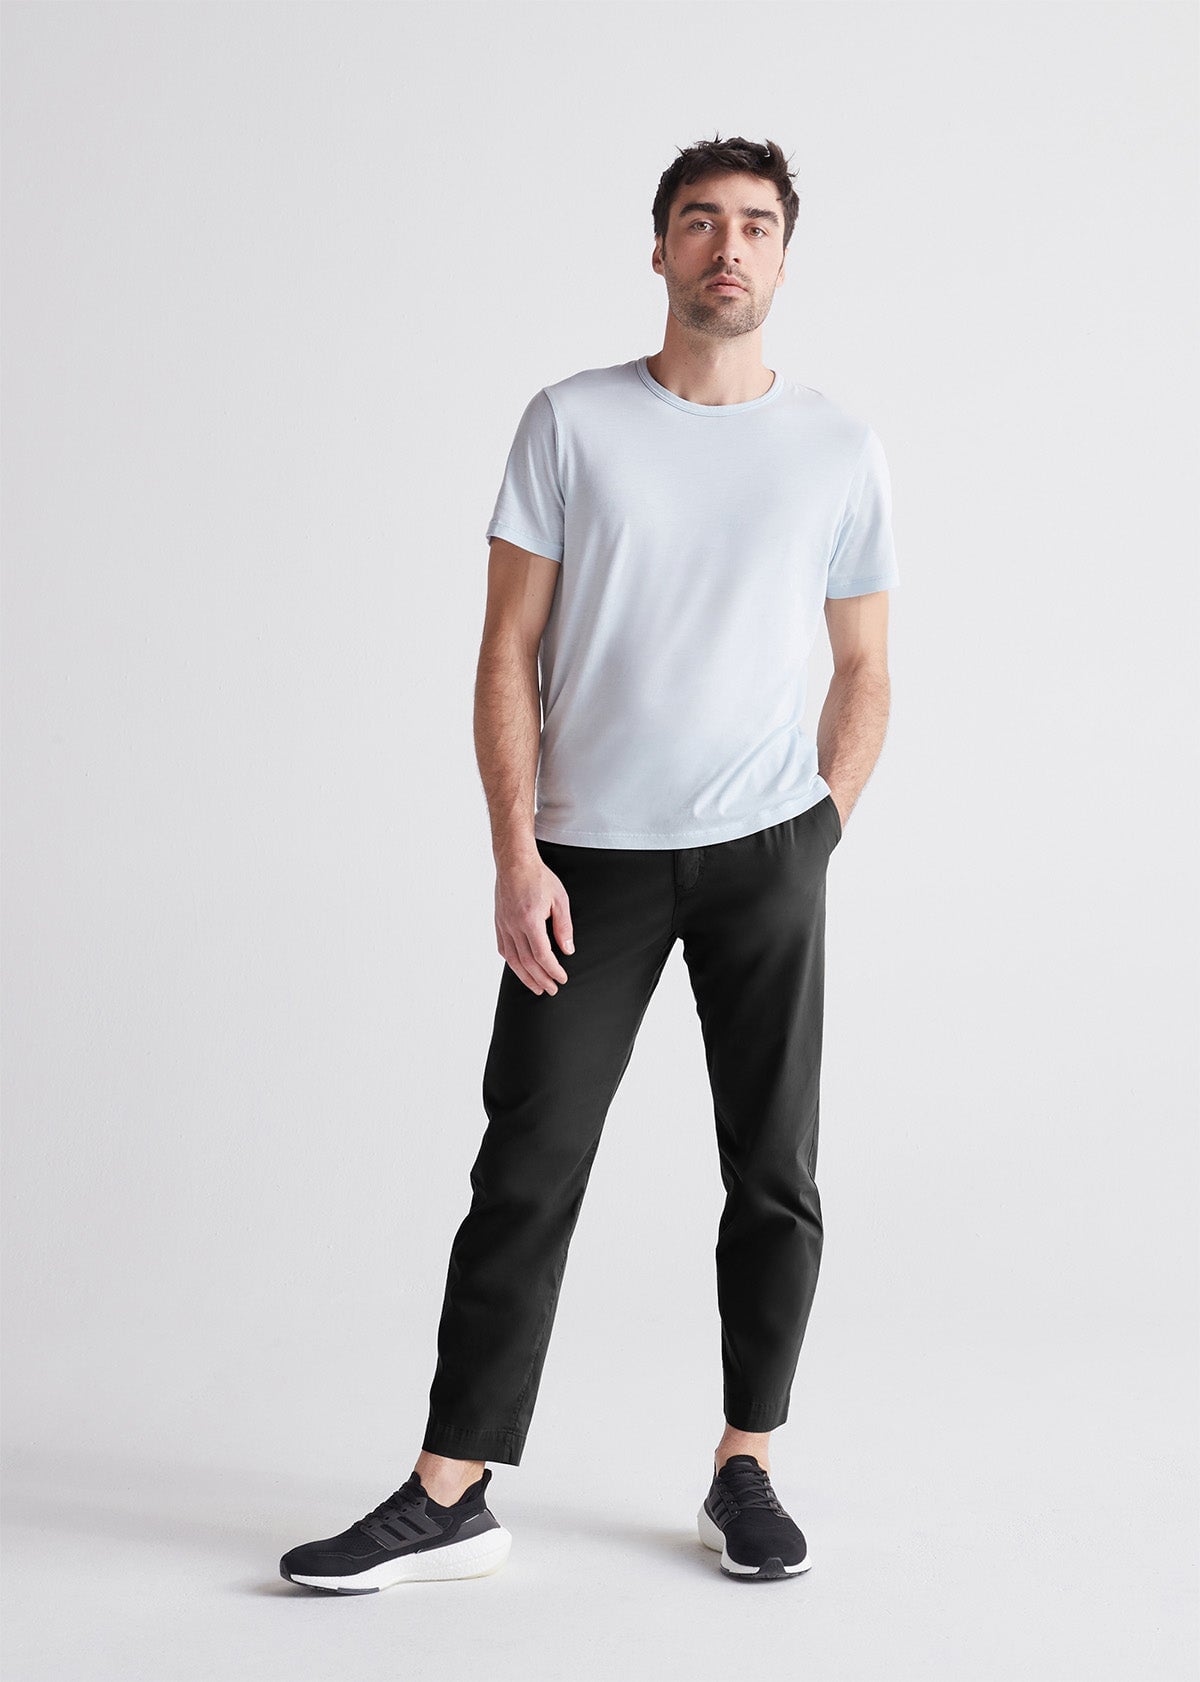 Charcoal Grey Peach Skin Low Rise Tailored Pants